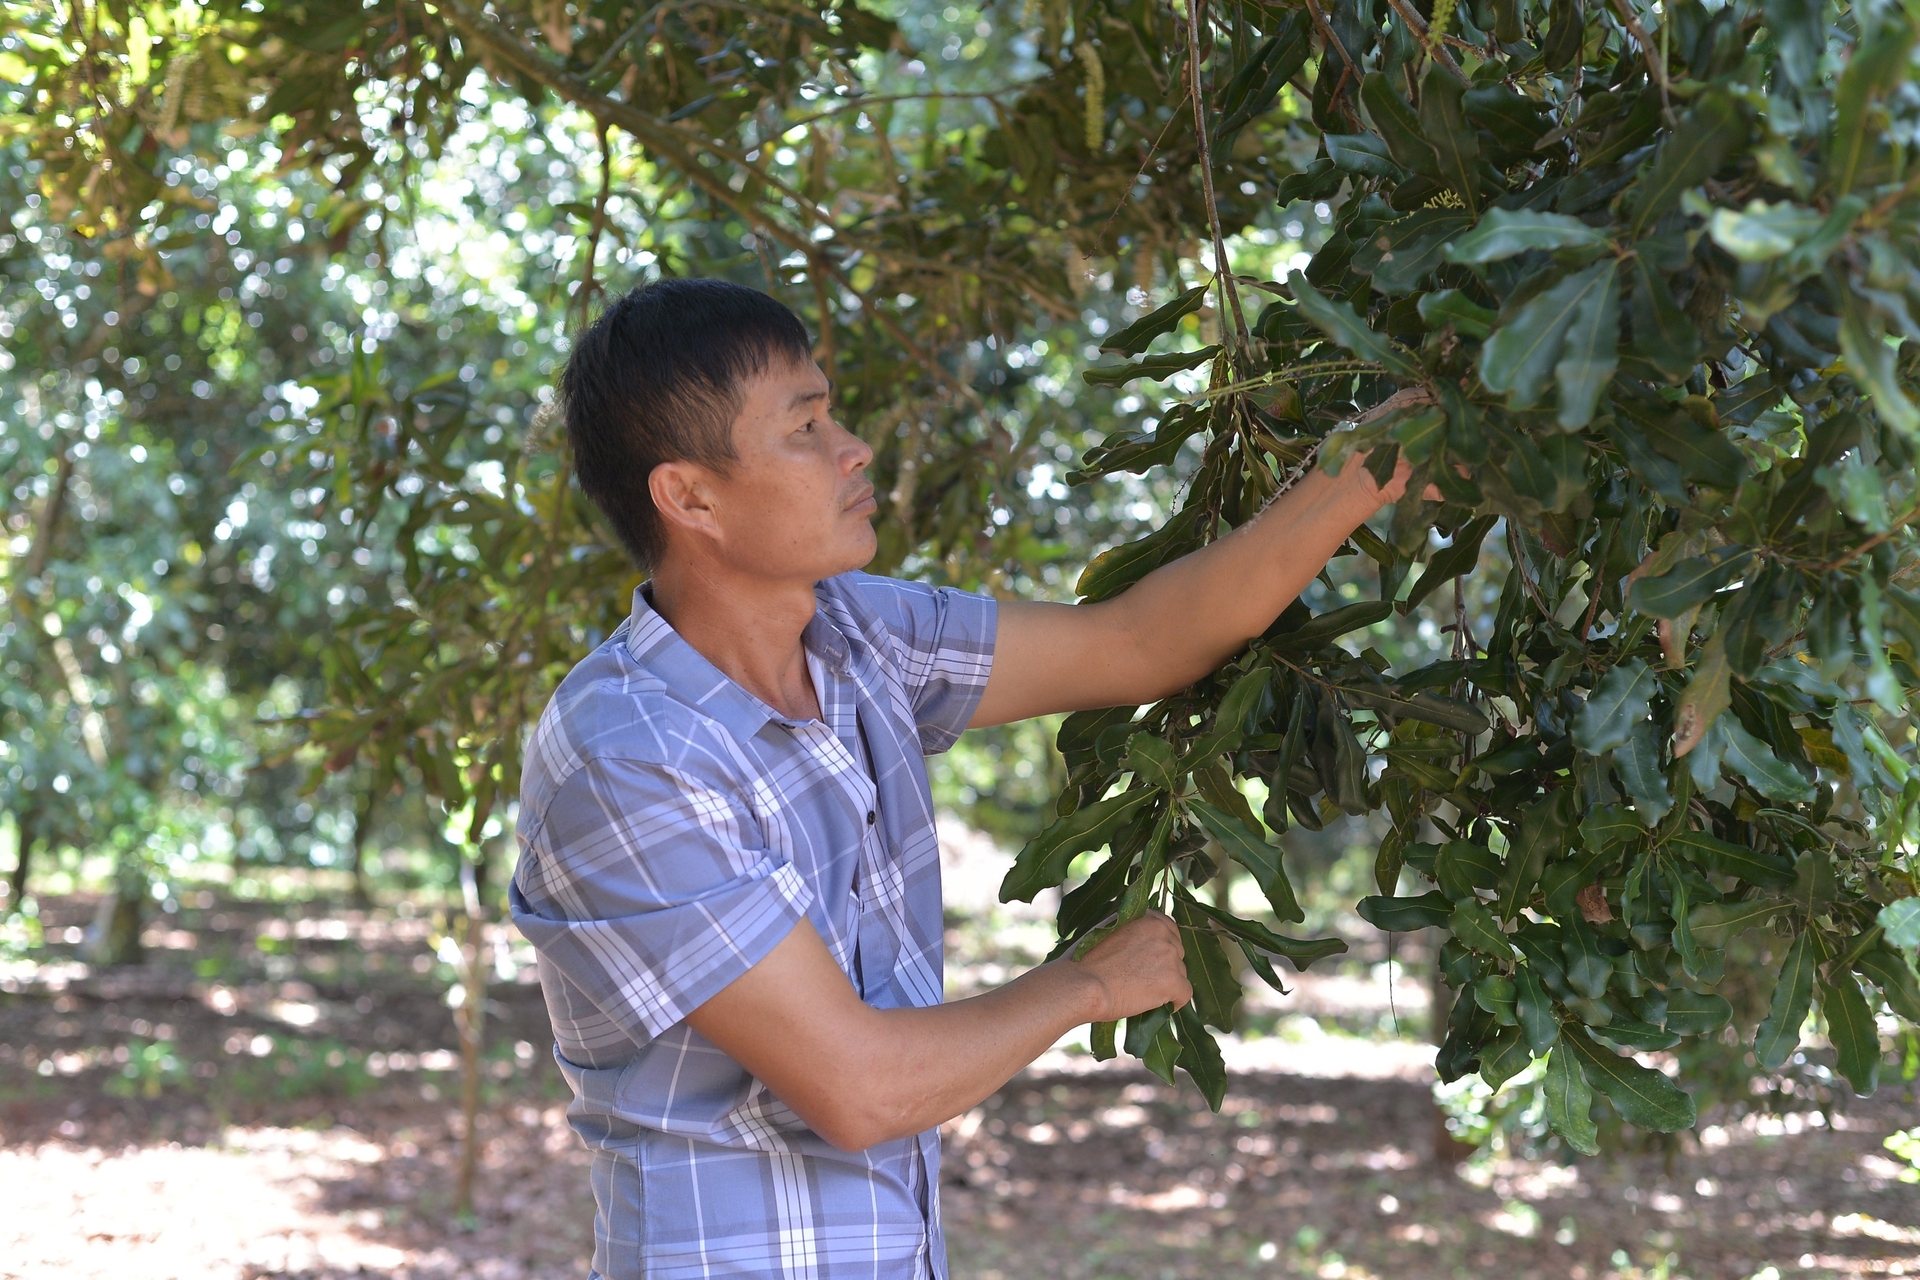 Macadamia trees have strict climate requirements, especially when flowering and fruiting, so not everywhere can be suitable for growing macadamia. Photo: Hoang Anh.